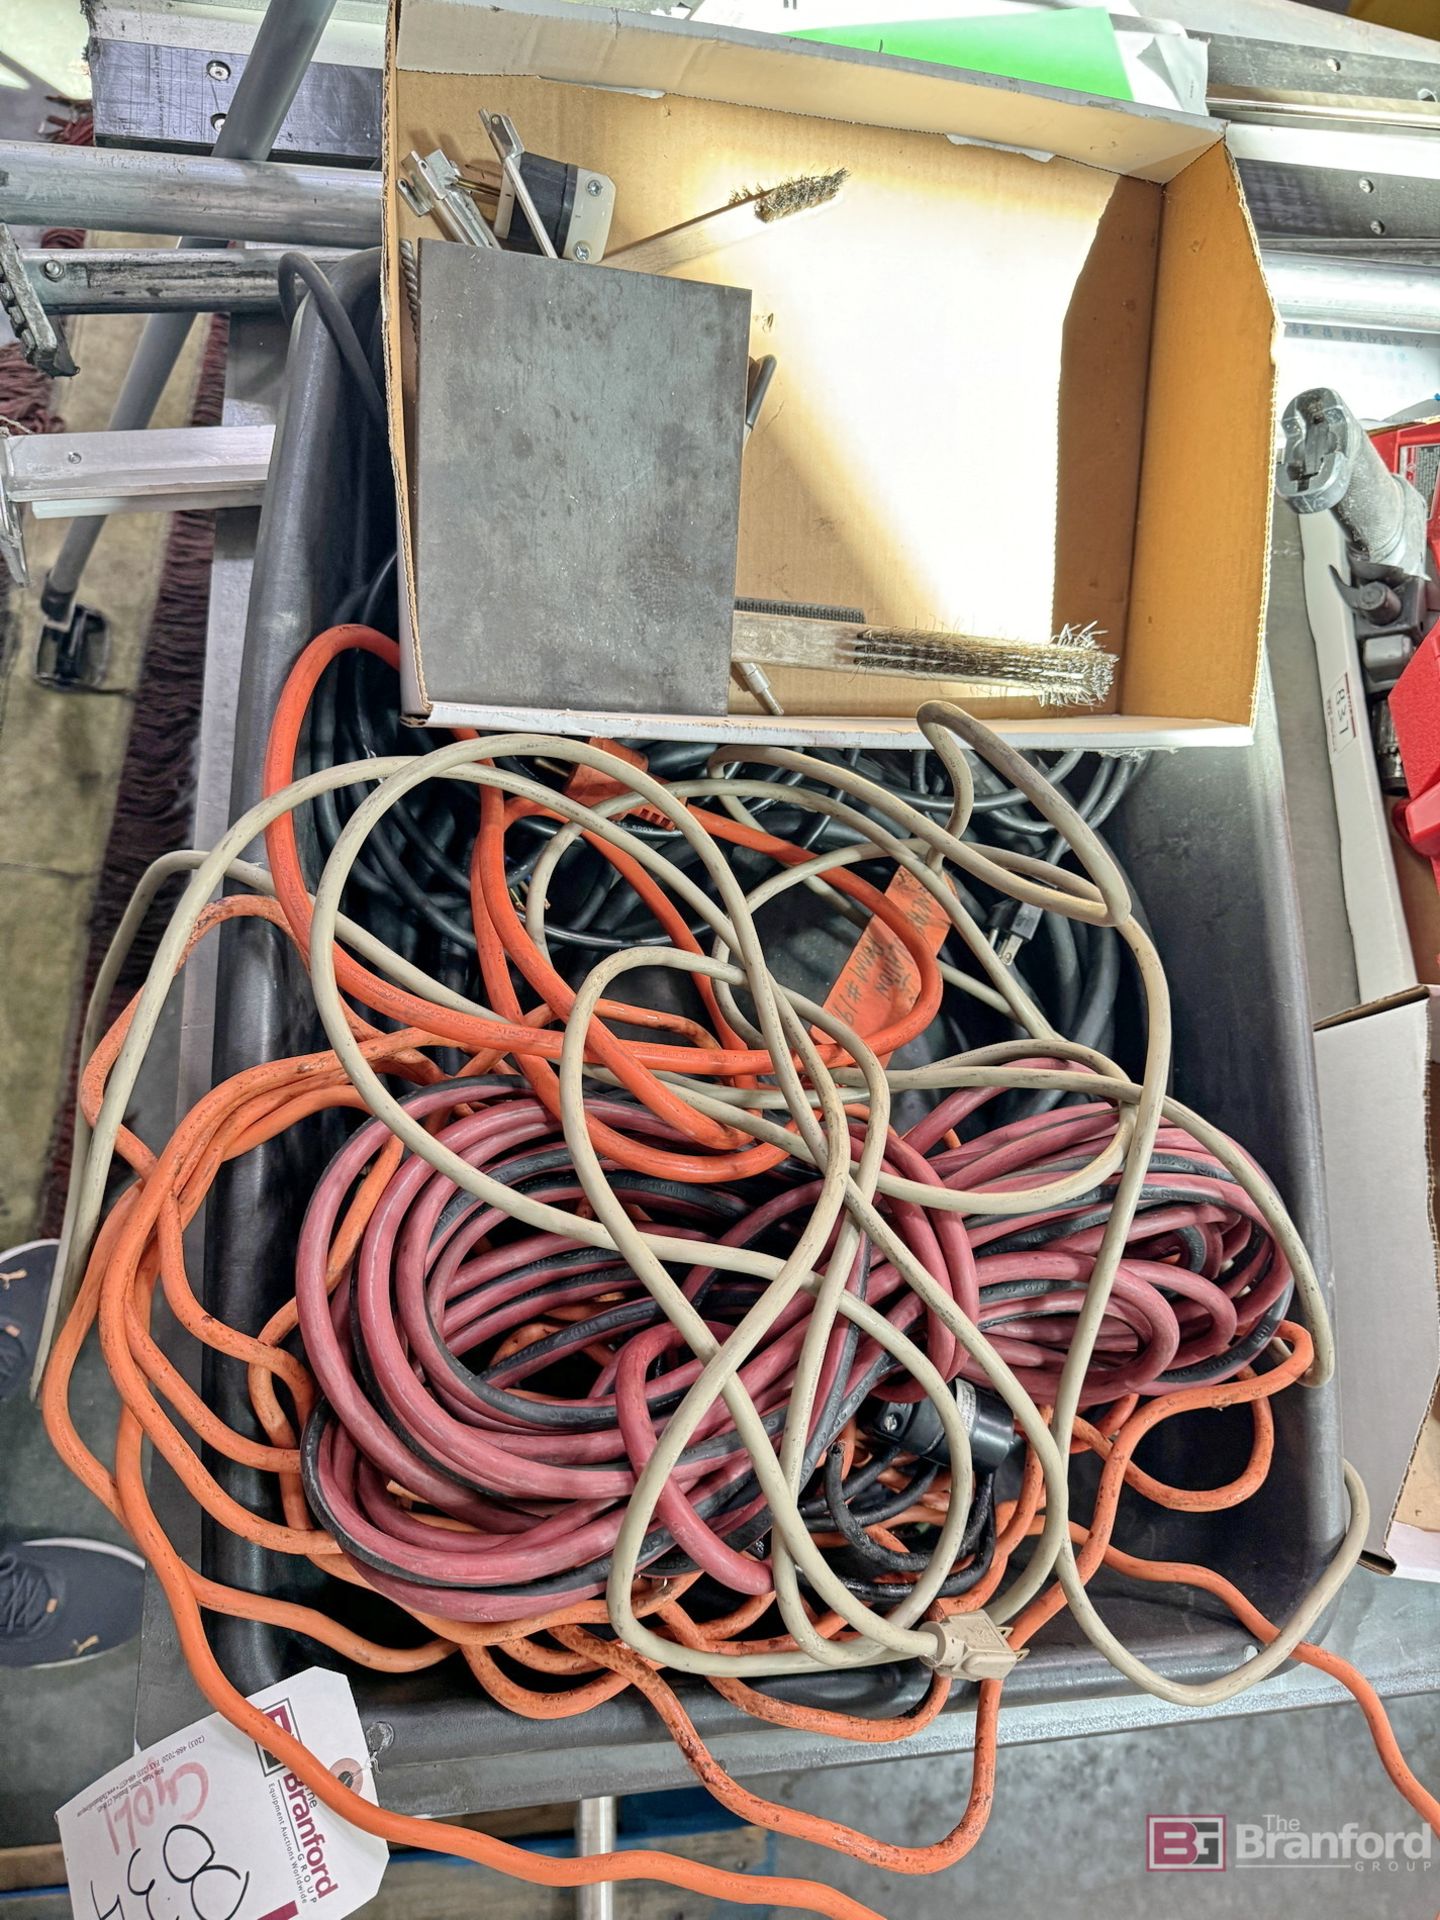 Lot of Welding Supplies and Accessories